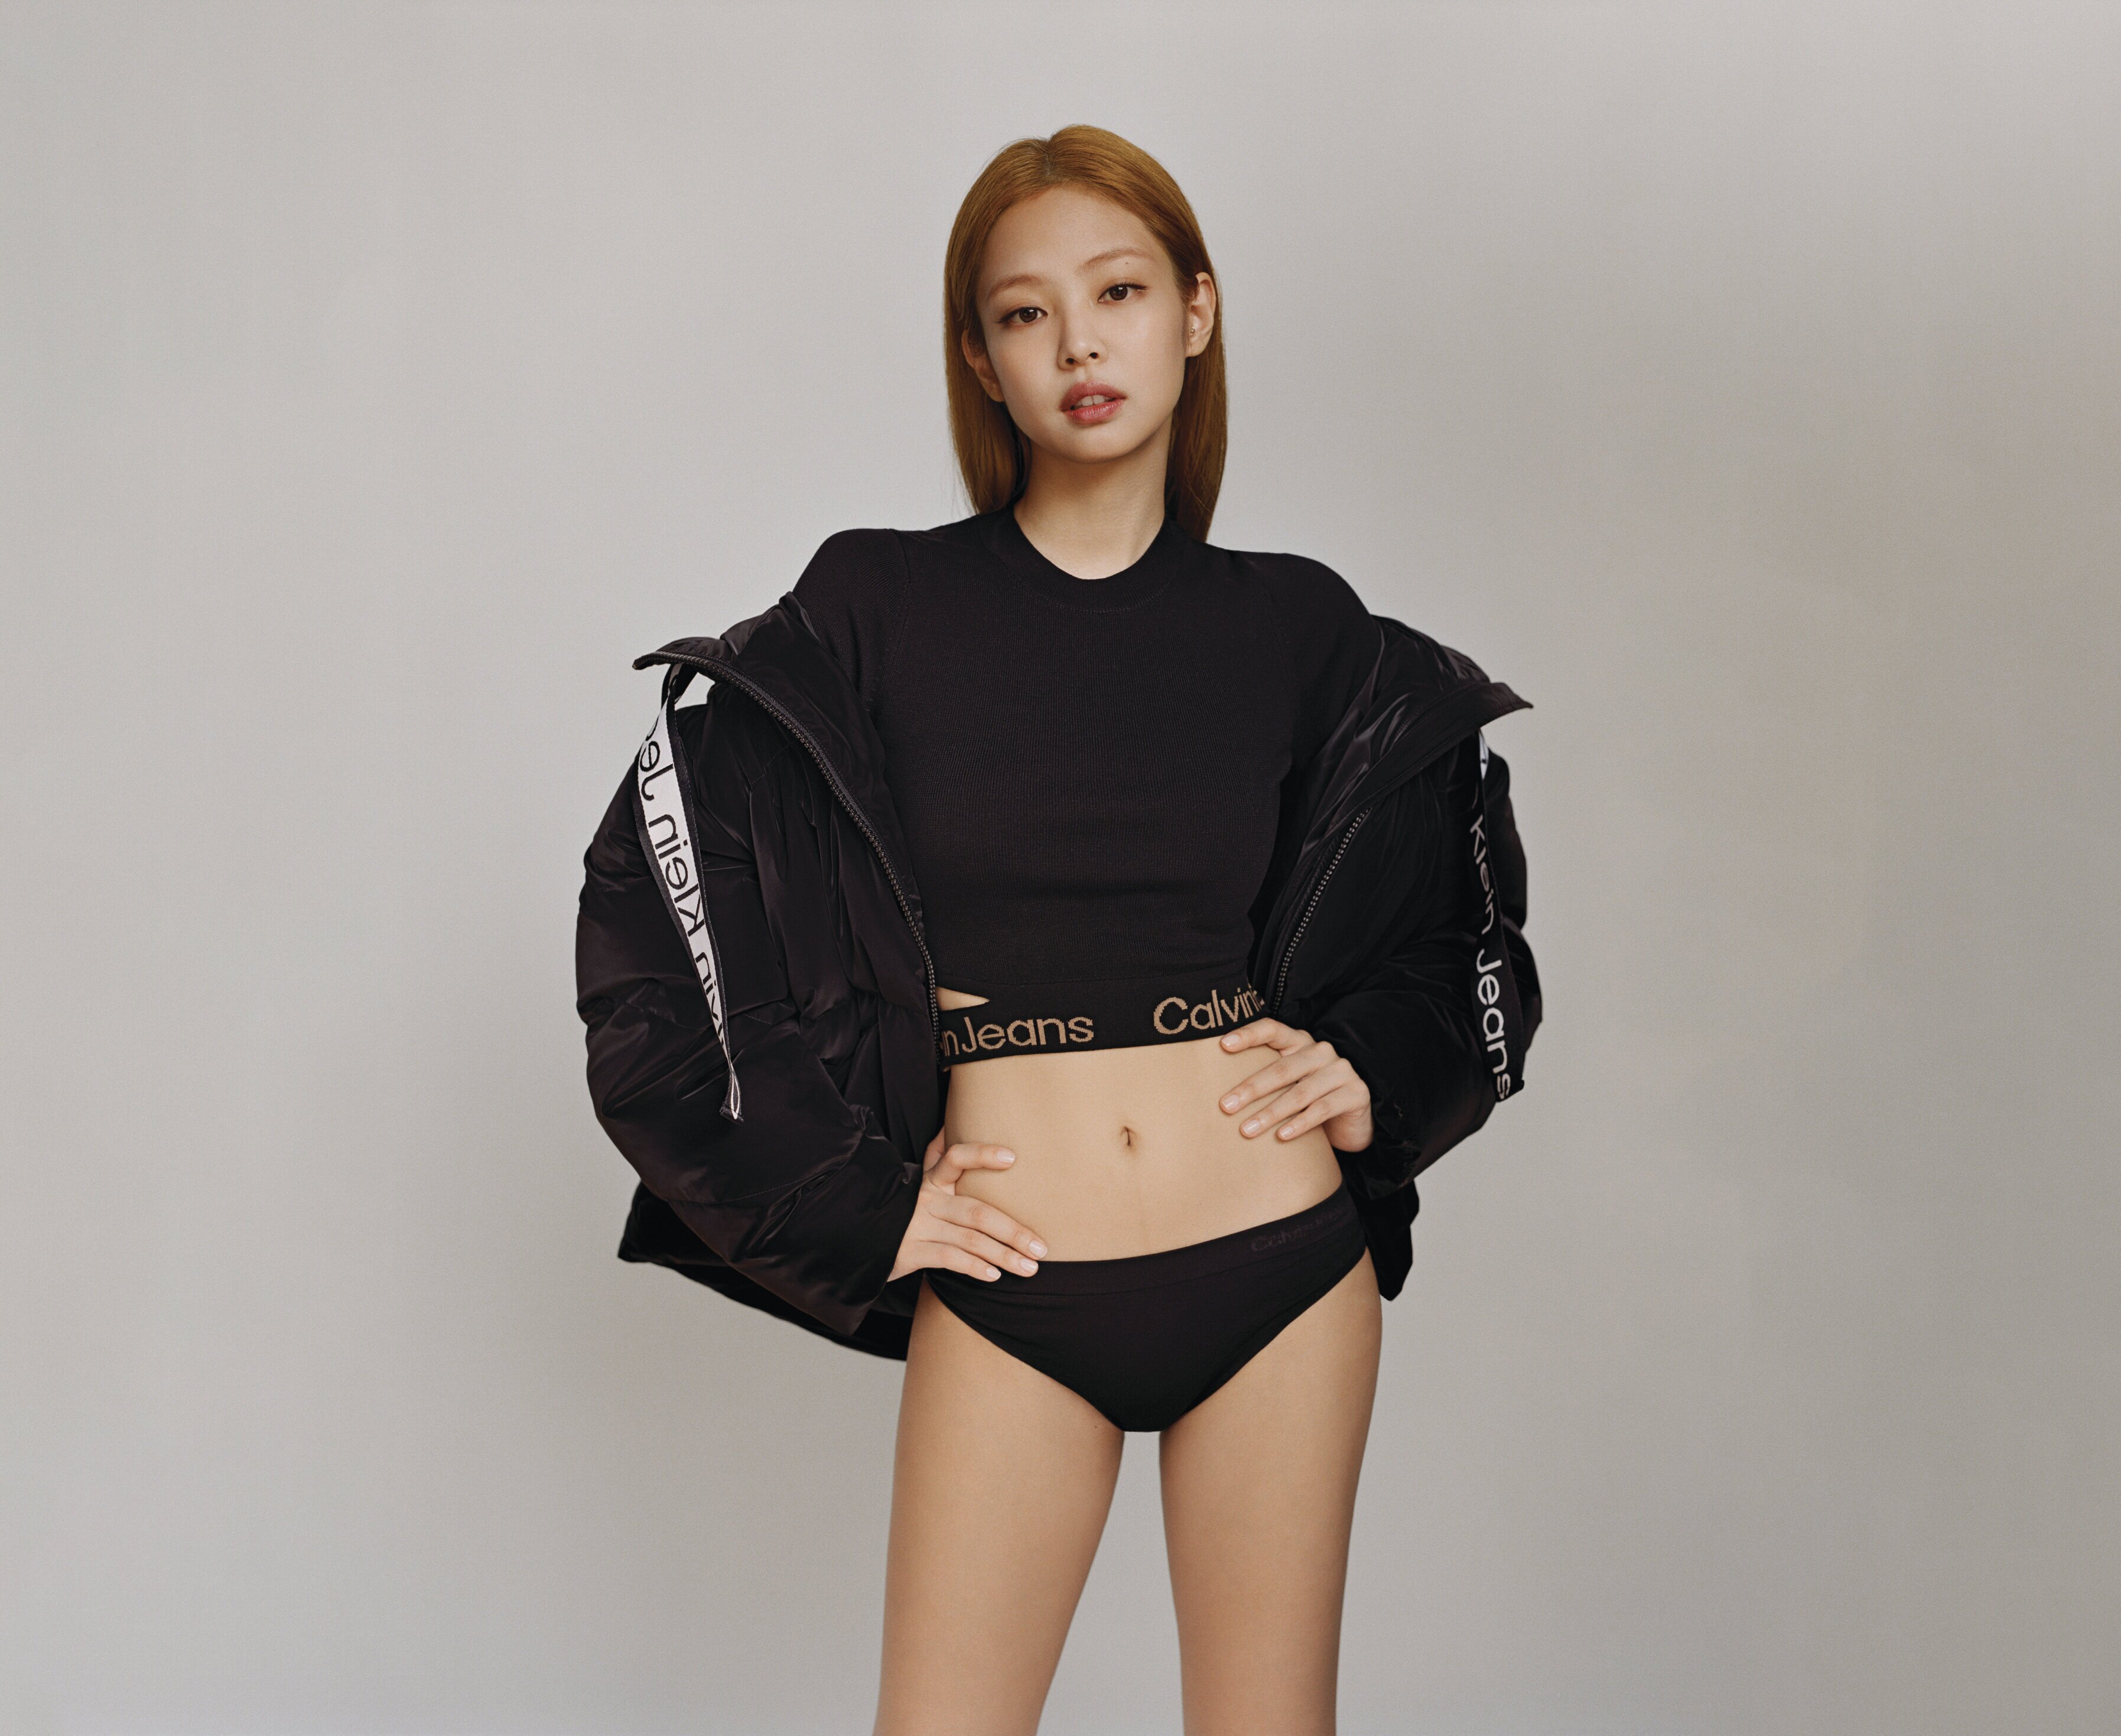 BLACKPINK Jennie for Calvin Klein FW 2022 Campaign | kpopping